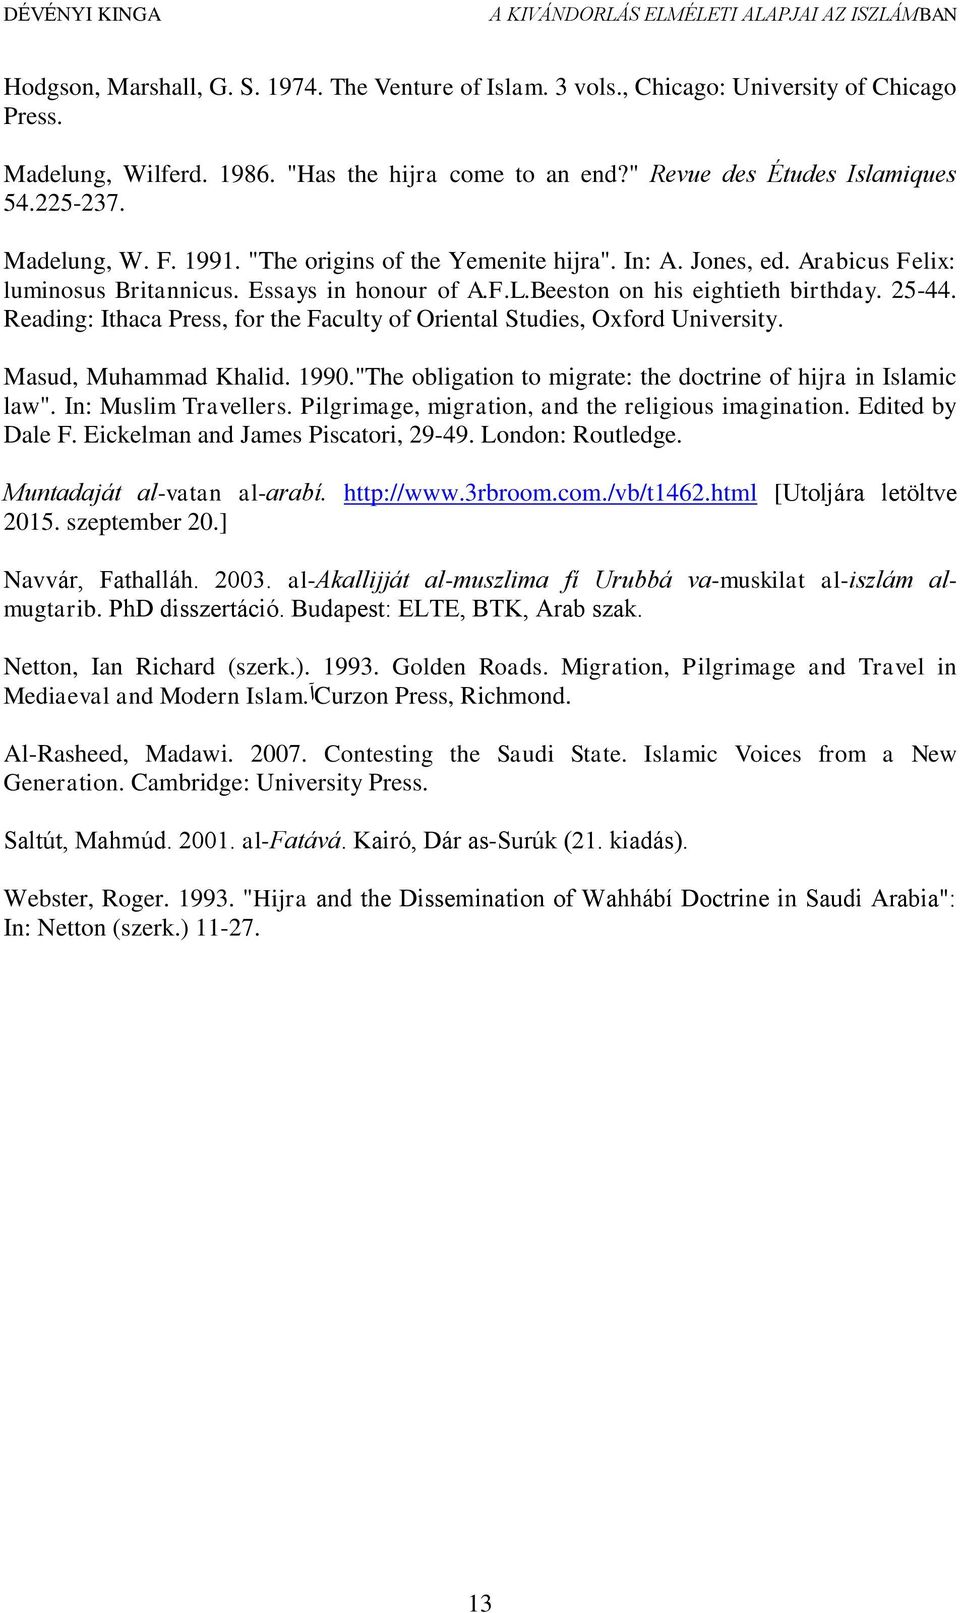 Reading: Ithaca Press, for the Faculty of Oriental Studies, Oxford University. Masud, Muhammad Khalid. 1990."The obligation to migrate: the doctrine of hijra in Islamic law". In: Muslim Travellers.